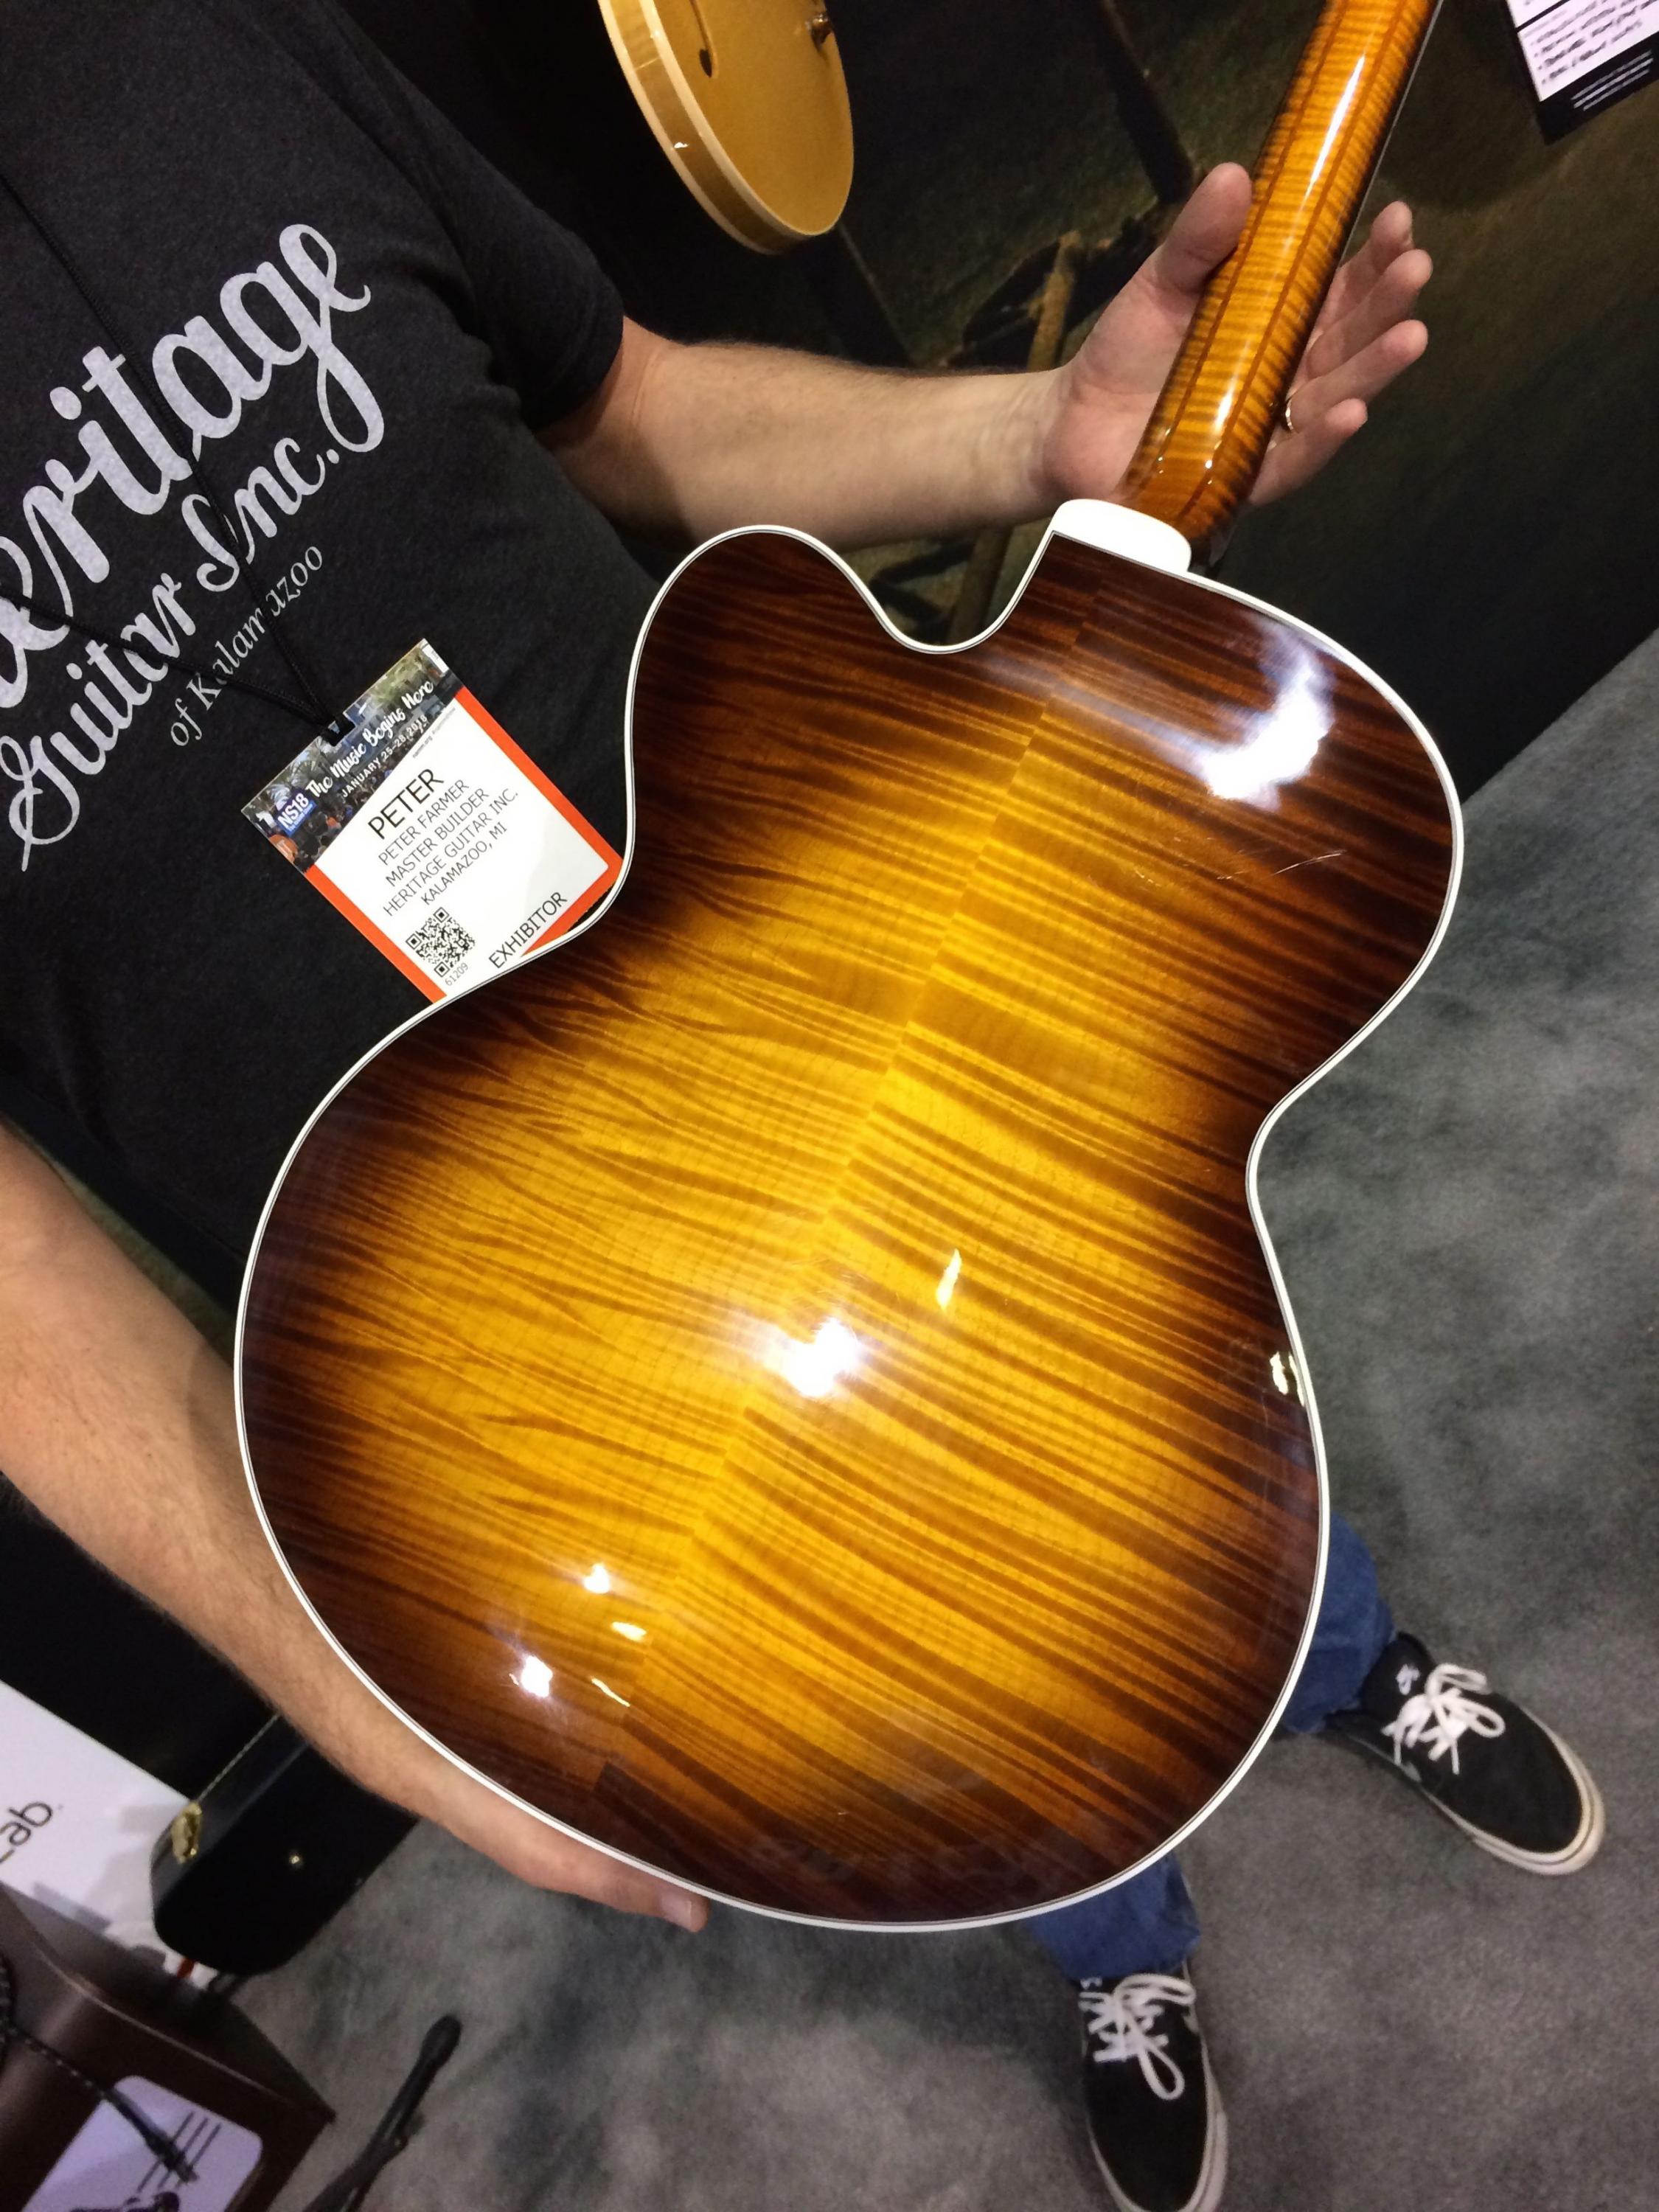 Heritage again - but seriously...-namm18_heritage_1777-jpg